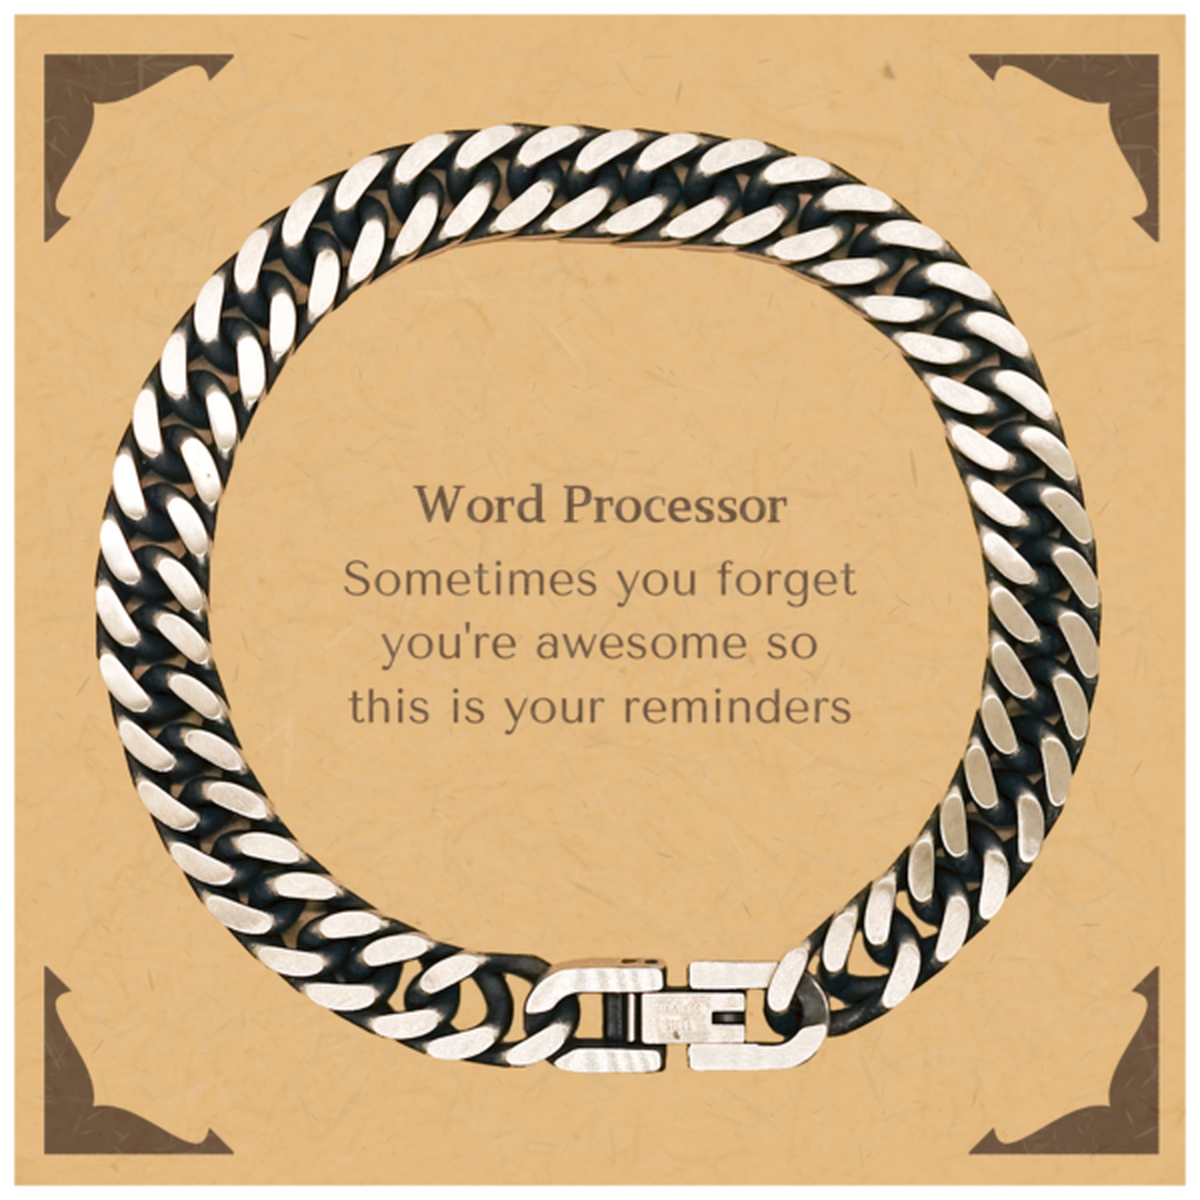 Sentimental Word Processor Cuban Link Chain Bracelet, Word Processor Sometimes you forget you're awesome so this is your reminders, Graduation Christmas Birthday Gifts for Word Processor, Men, Women, Coworkers